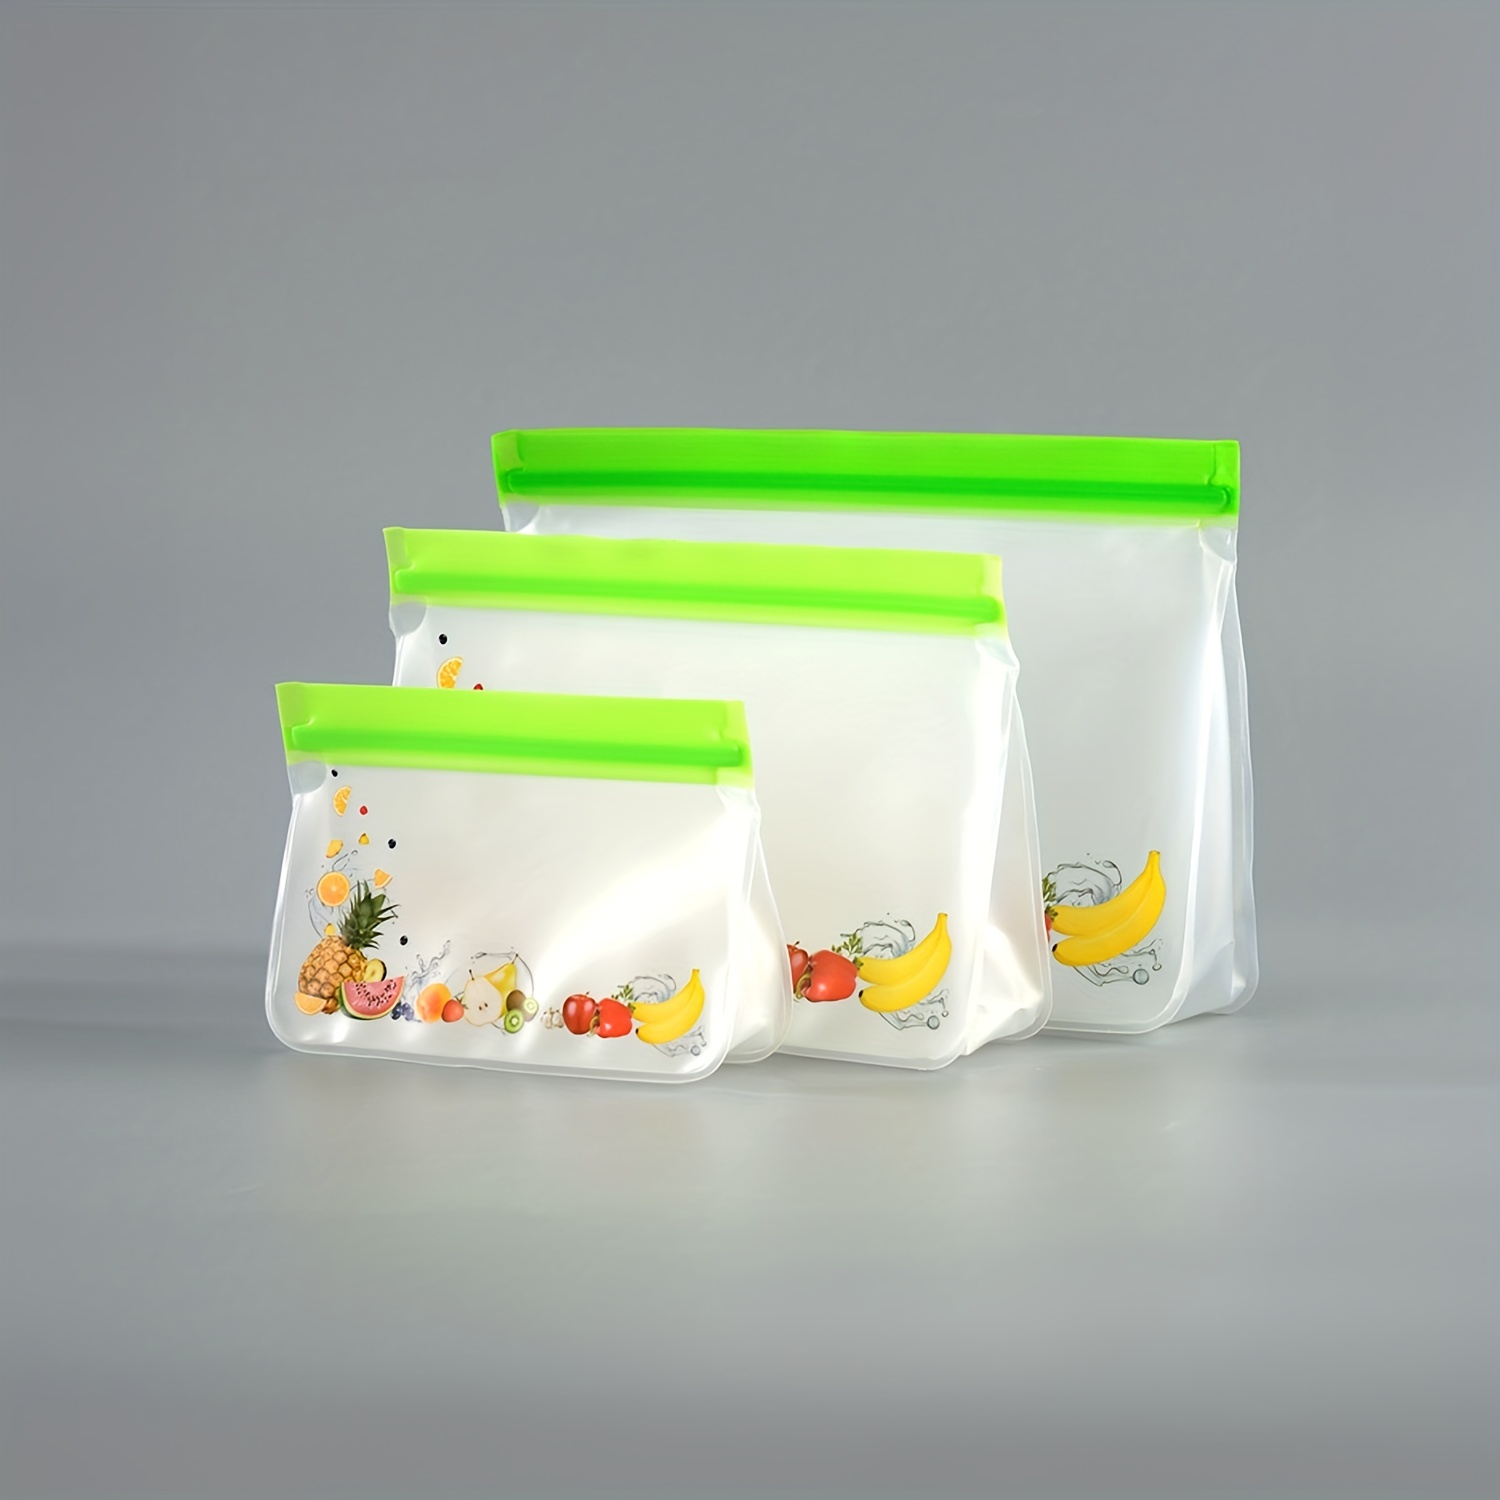 [ PACK OF 50 ] X-Large 3 Gallon Food Storage Bags for Freezer, Meat, Space  Organization, Packing, Lunch, or Travel